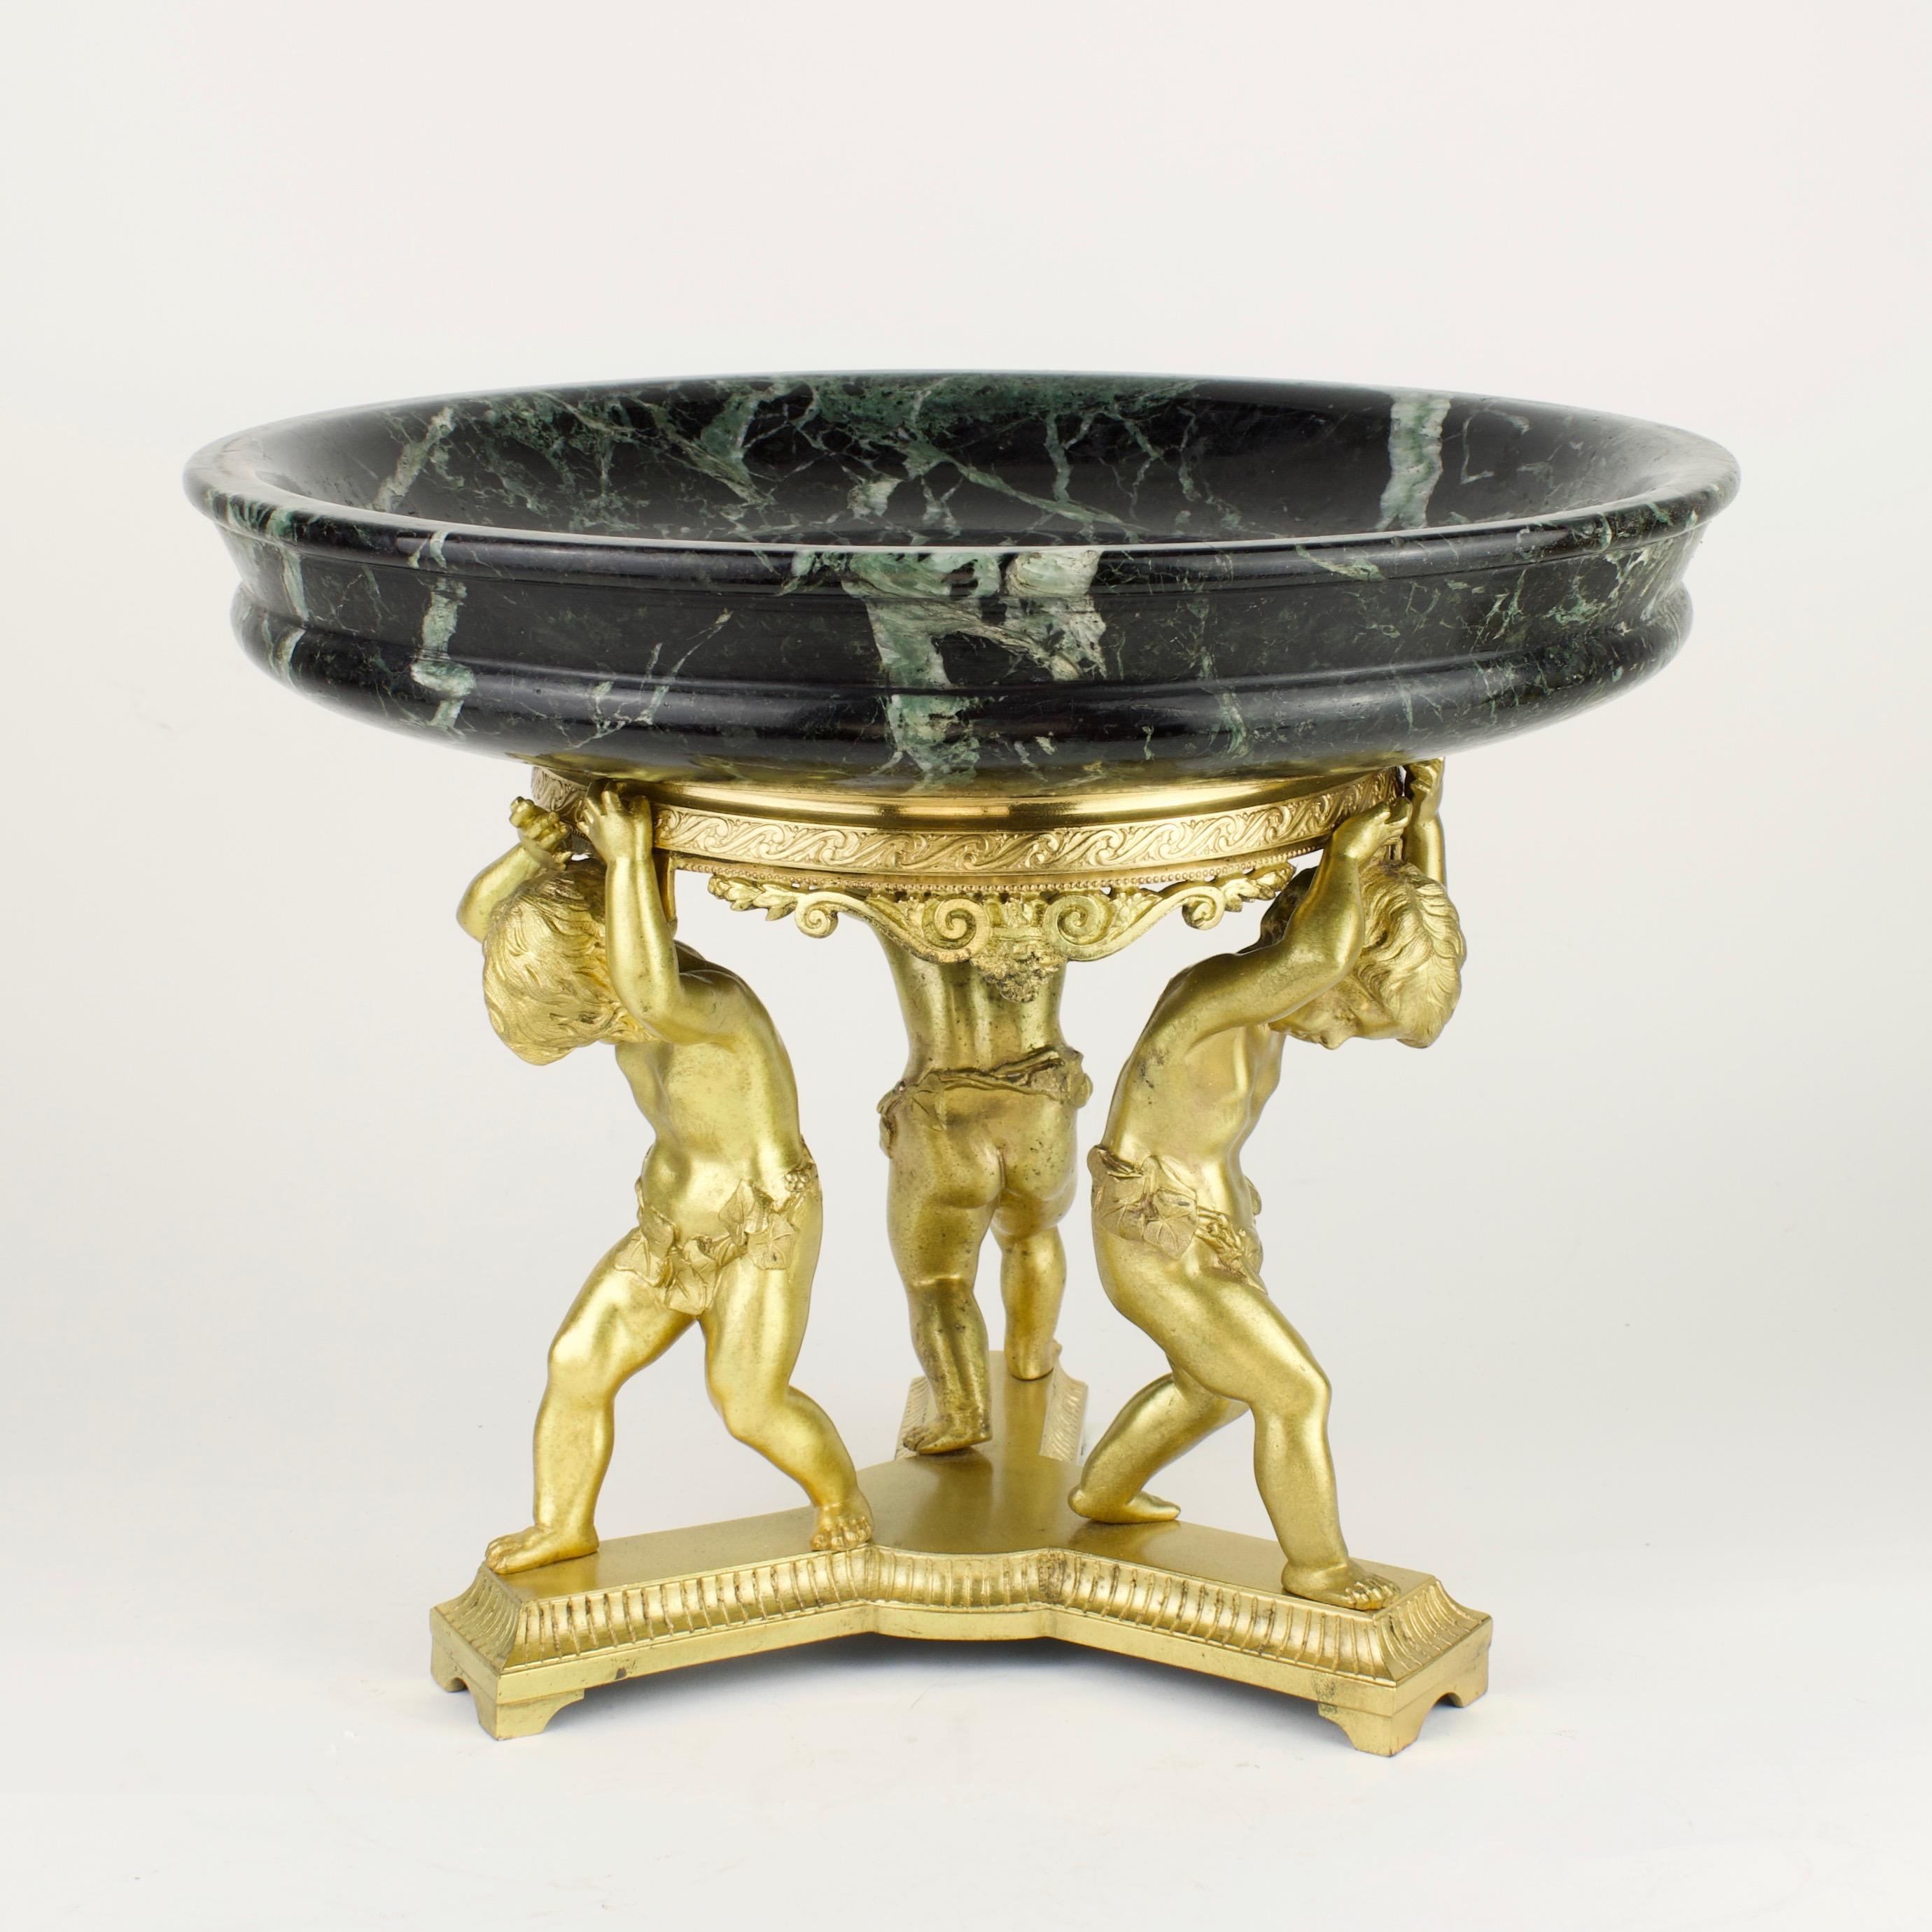 Late 19th Century French Empire gilt bronze putti and marble centerpiece

The centerpiece stands on a triangular, fluted base with arched feet; on the triangular base three finely chiseled putti with open eyes draped in oak leaves who are